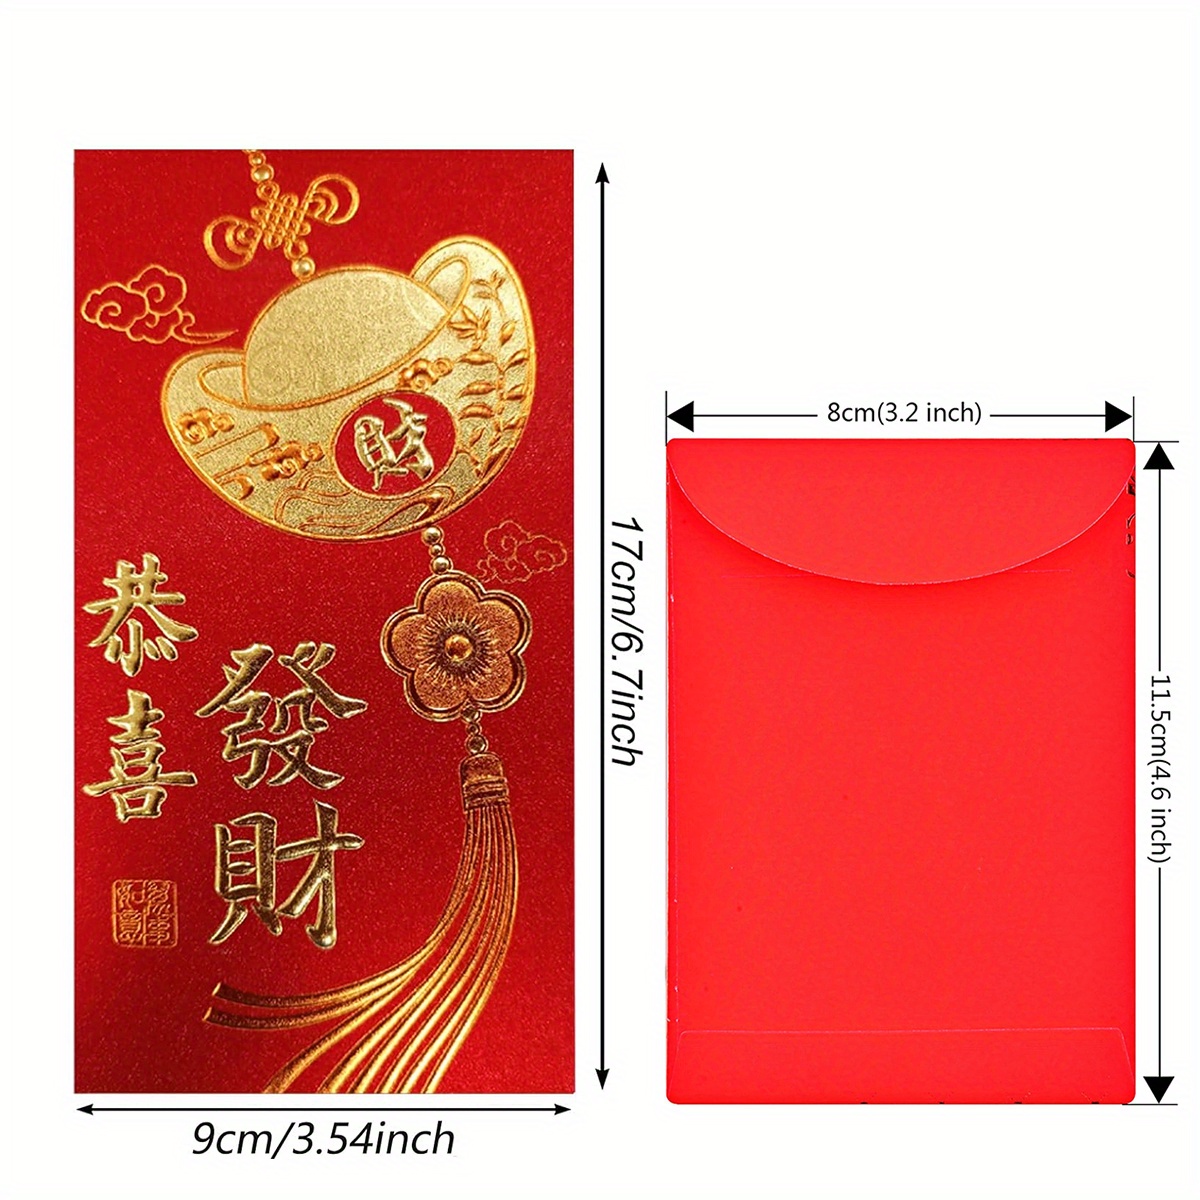 MAGICLULU 4pcs Chinese Red Envelopes 2024 Dragon Year Red Packet 3D Pop-Up  Lucky Money Envelopes Hong Bao for Spring Festival Lunar New Year Party